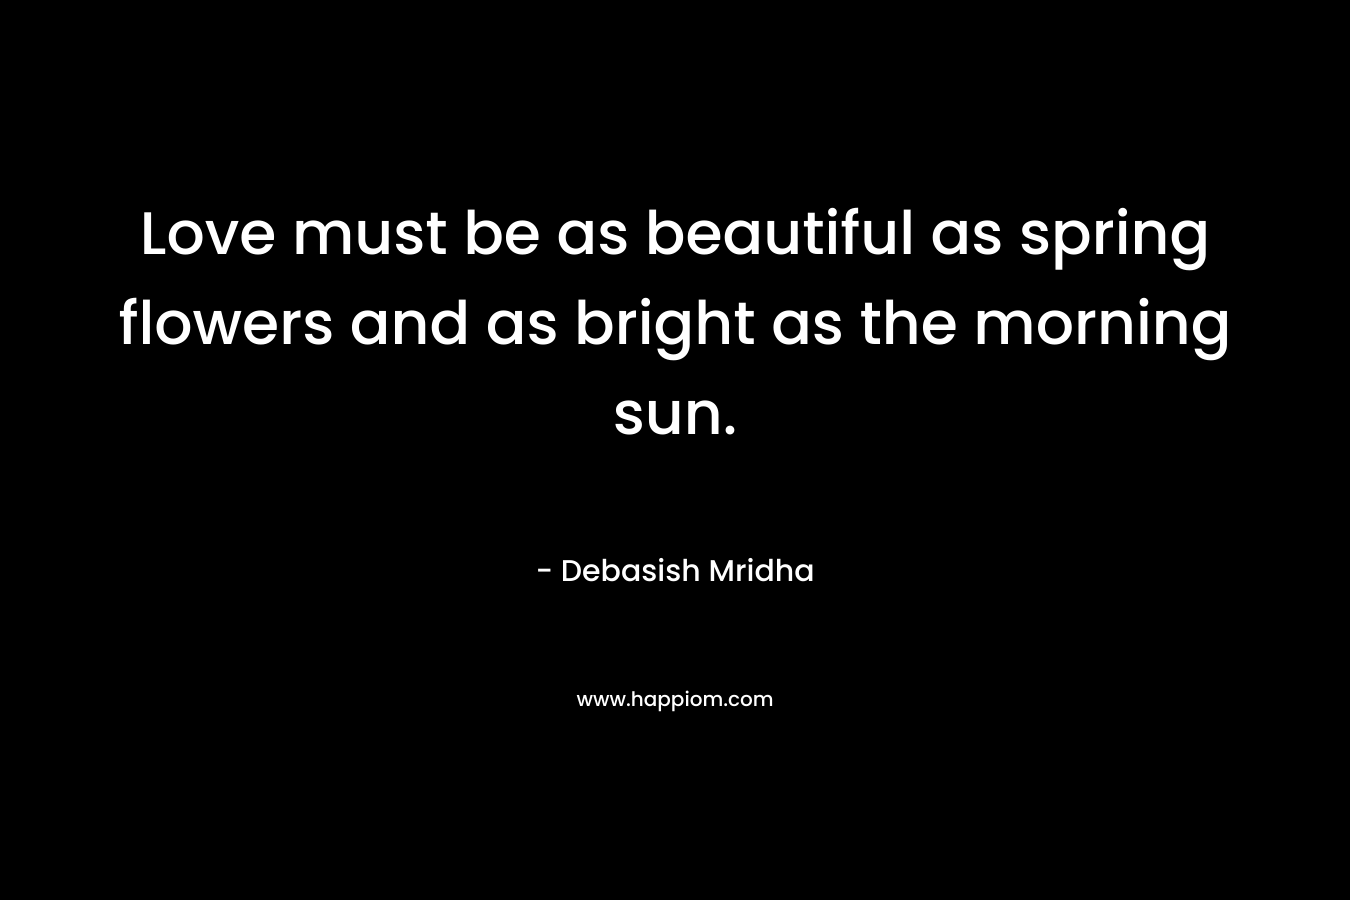 Love must be as beautiful as spring flowers and as bright as the morning sun.